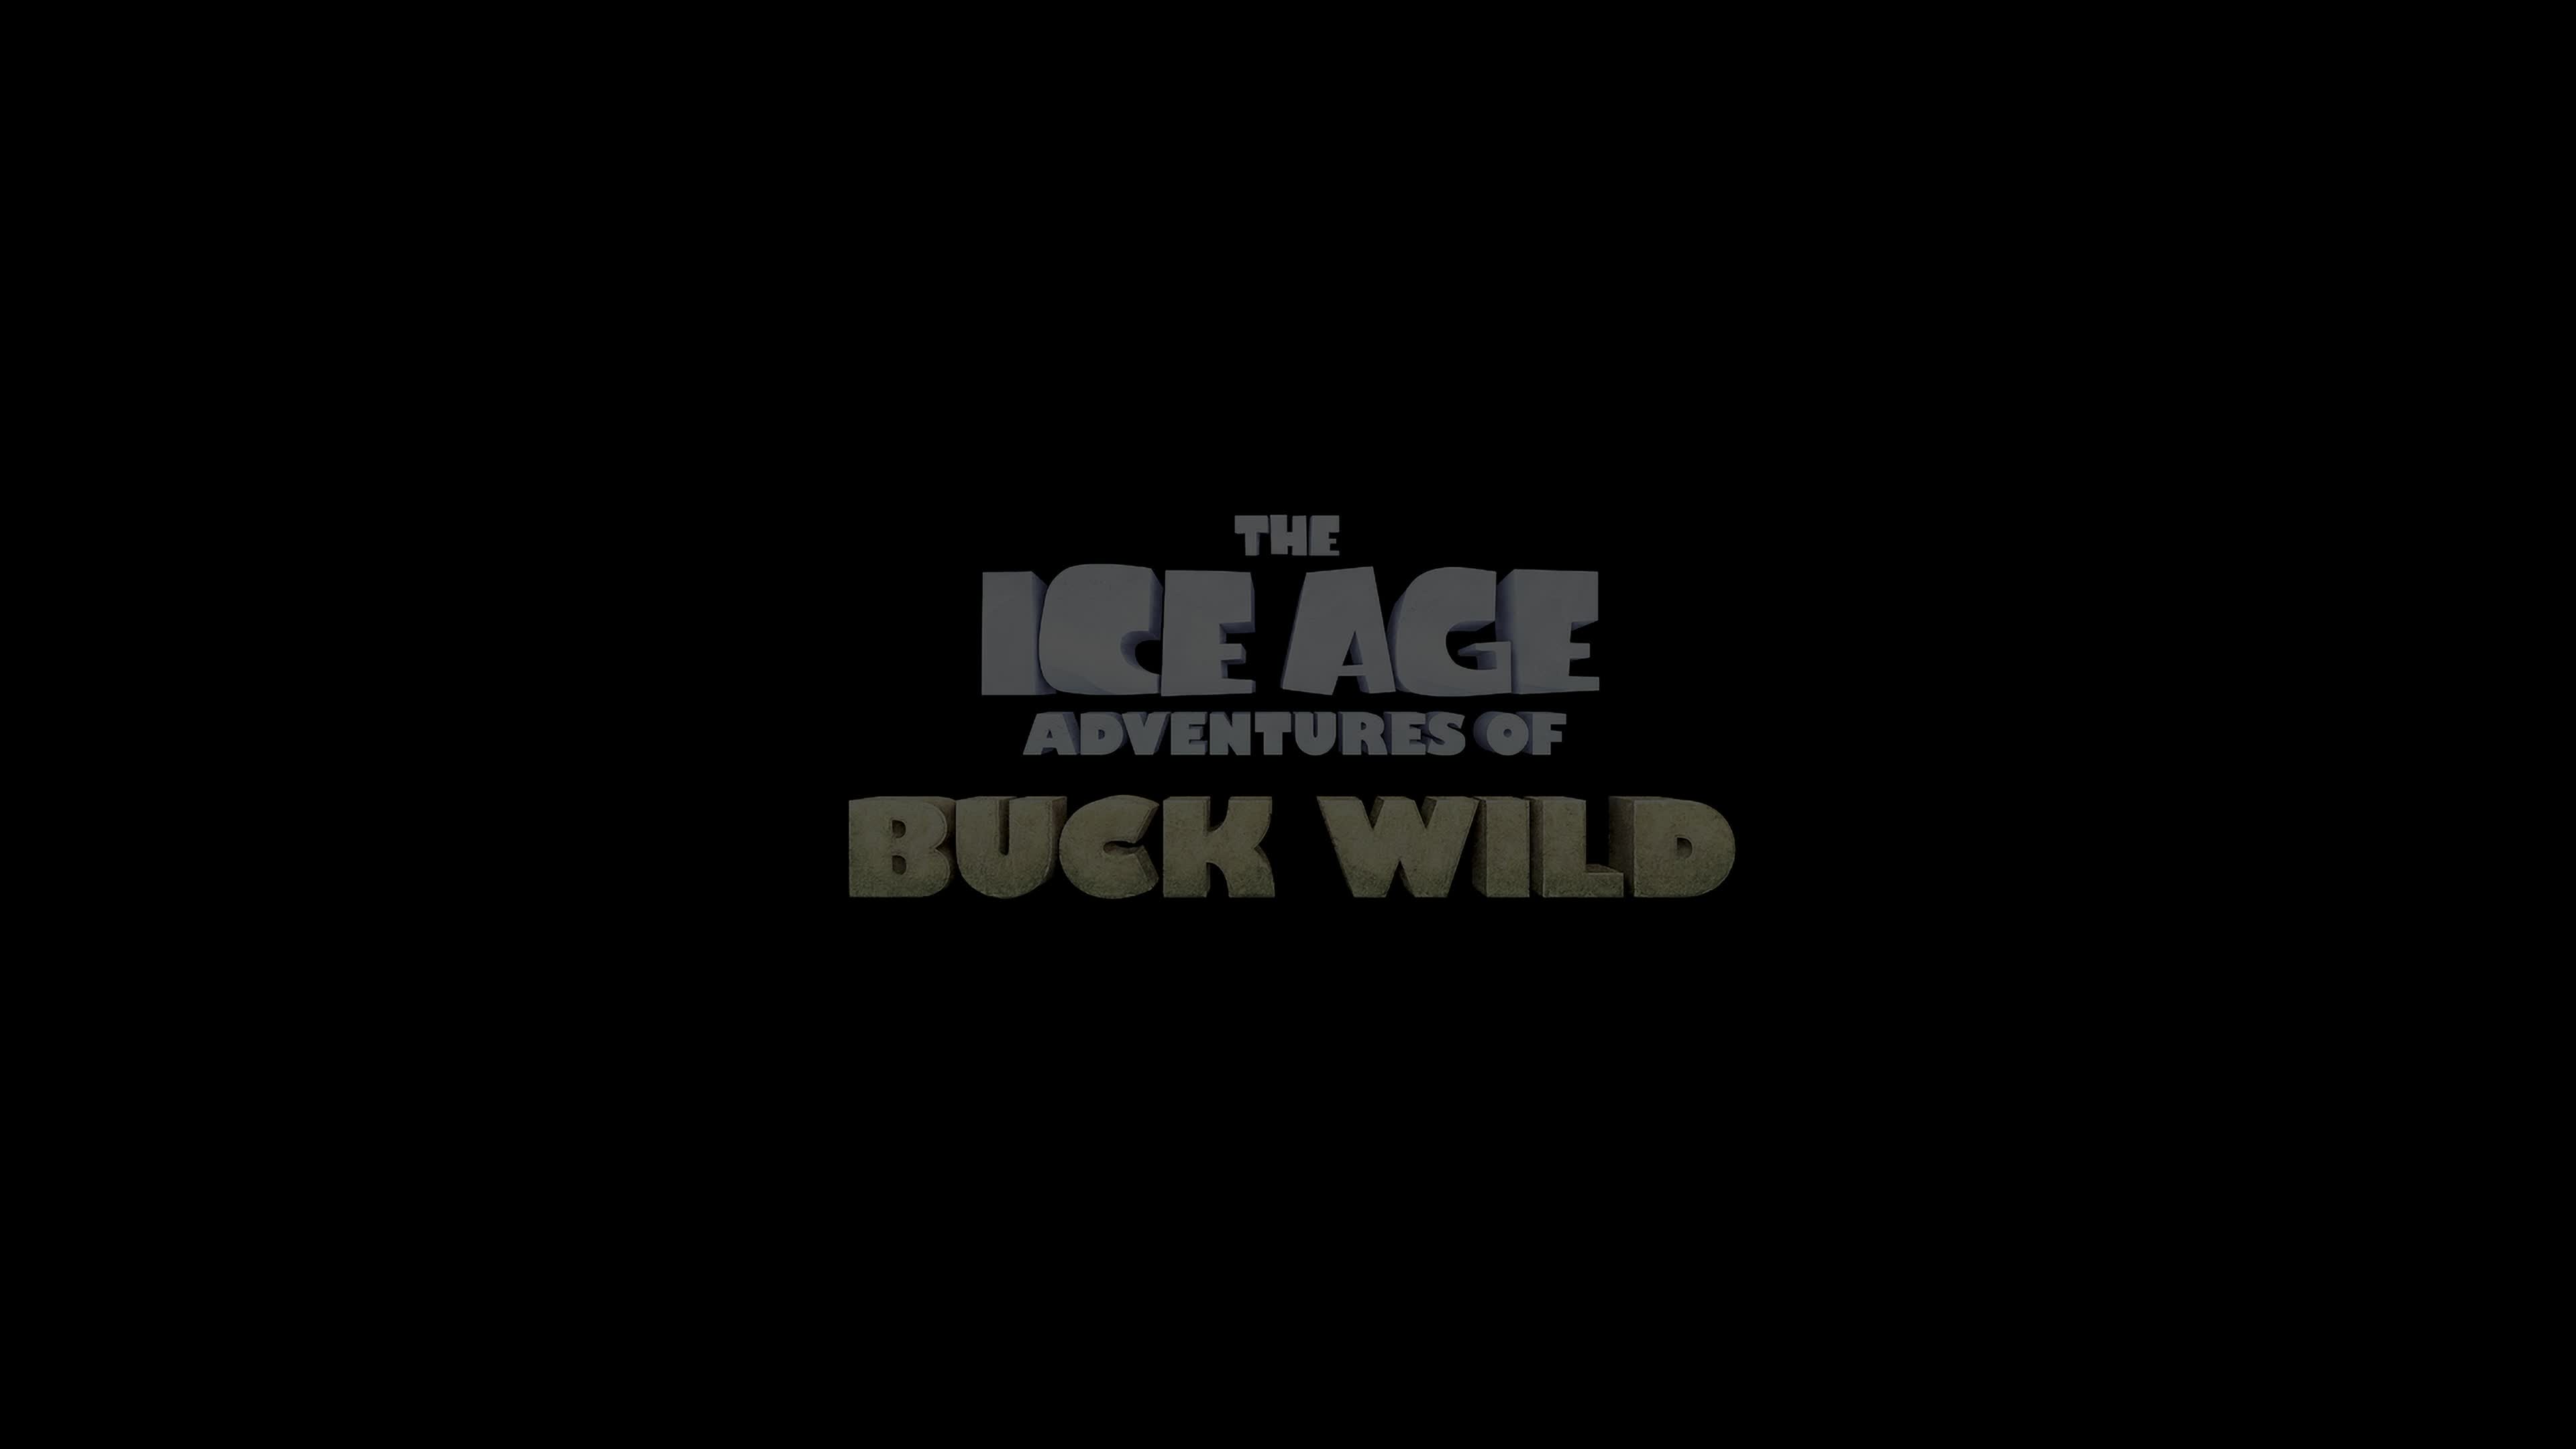 The Ice Age Adventures of Buck Wild 2022 DSNP 2160p WEB DL DDP5 1 Atmos HDR H 265 EVO TGx